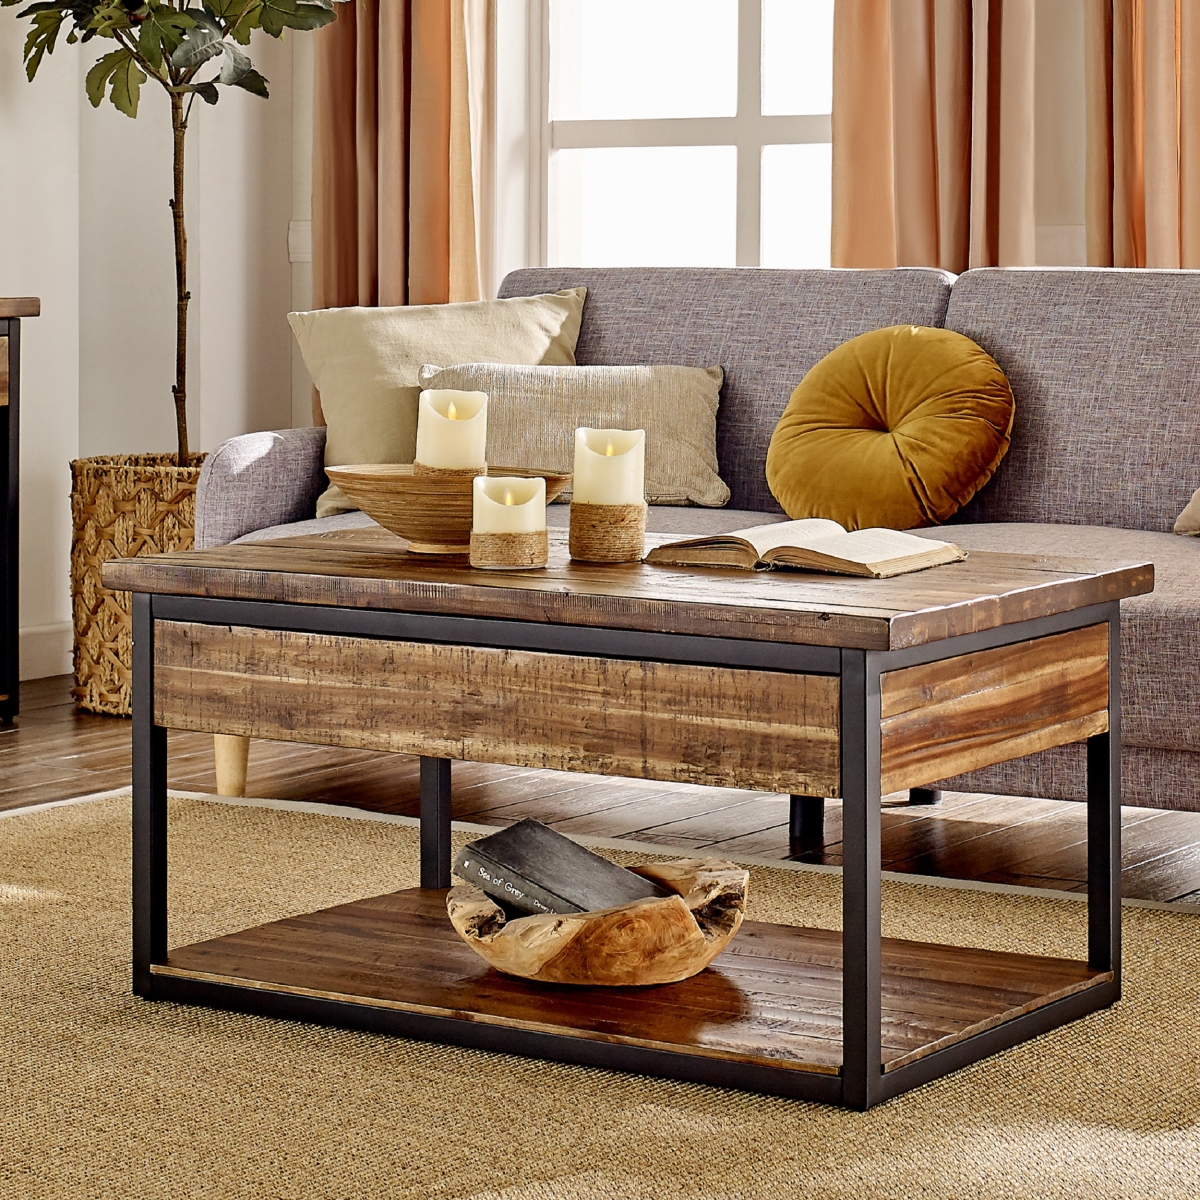 Picture of Alaterre ANCM1174 42 in. Claremont Rustic Wood Coffee Table with Low Shelf